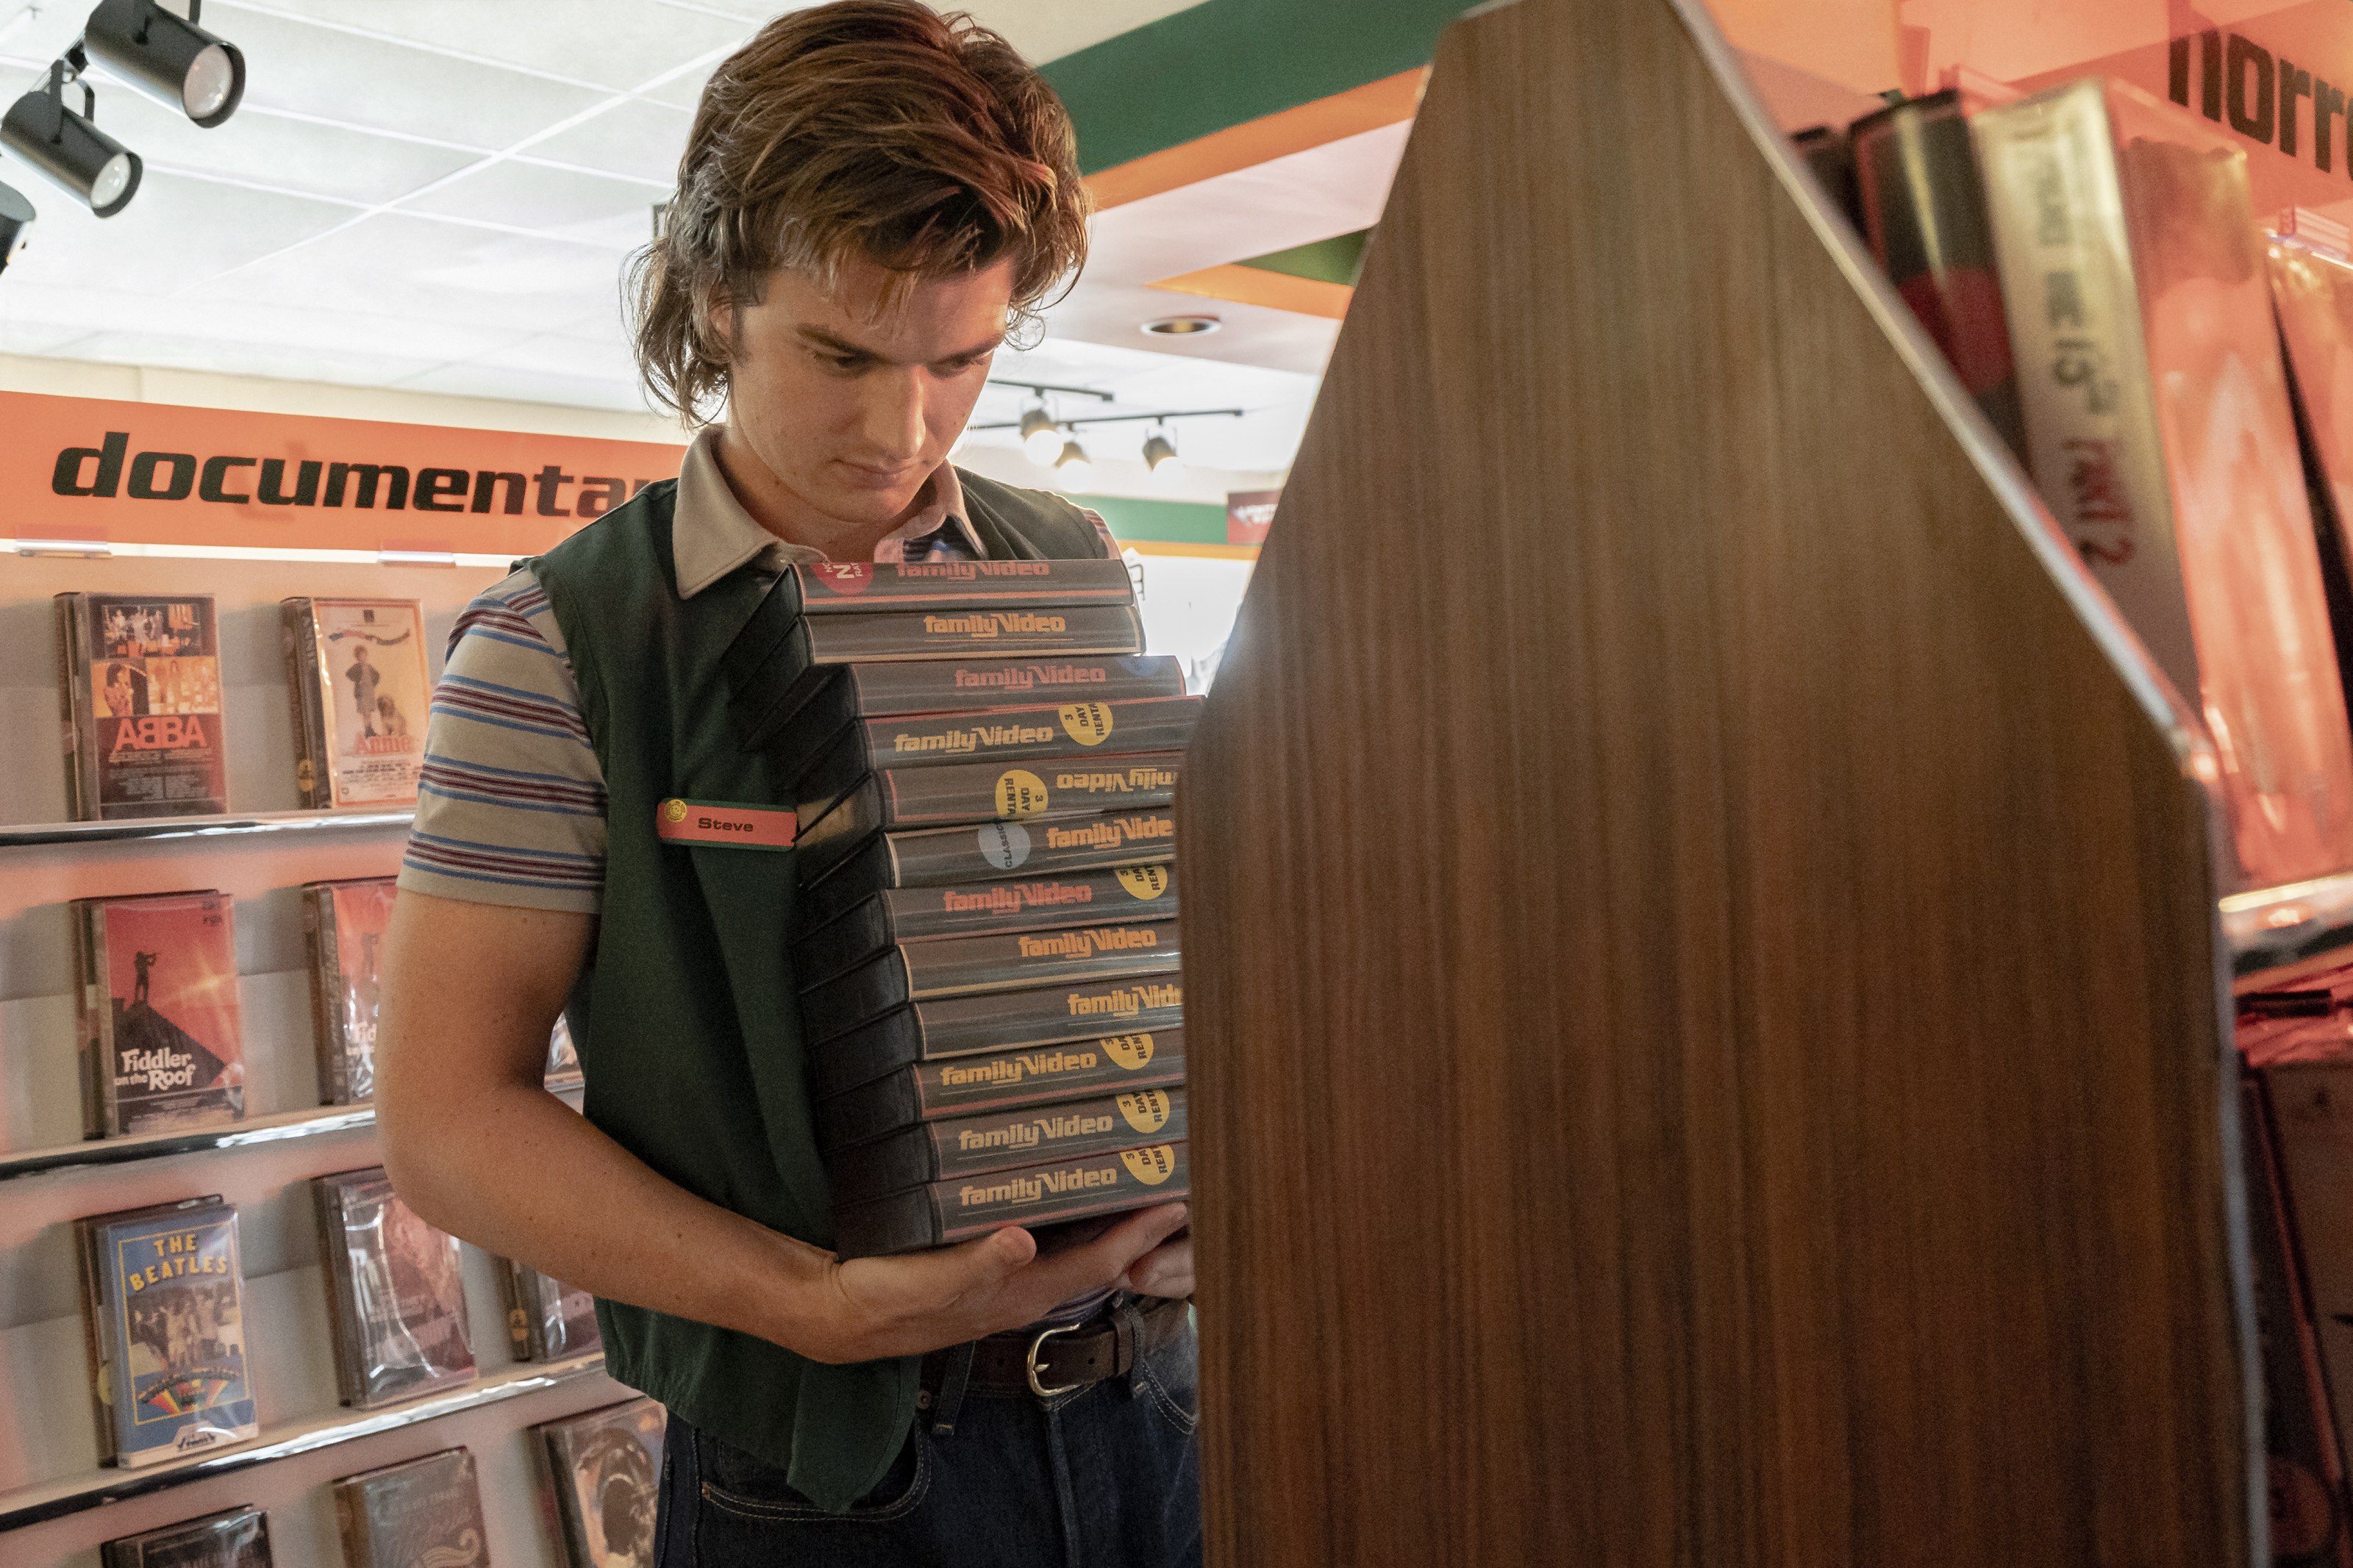 Stranger Things' Season 4 Soundtrack: What Songs Are Played in Volume 1?